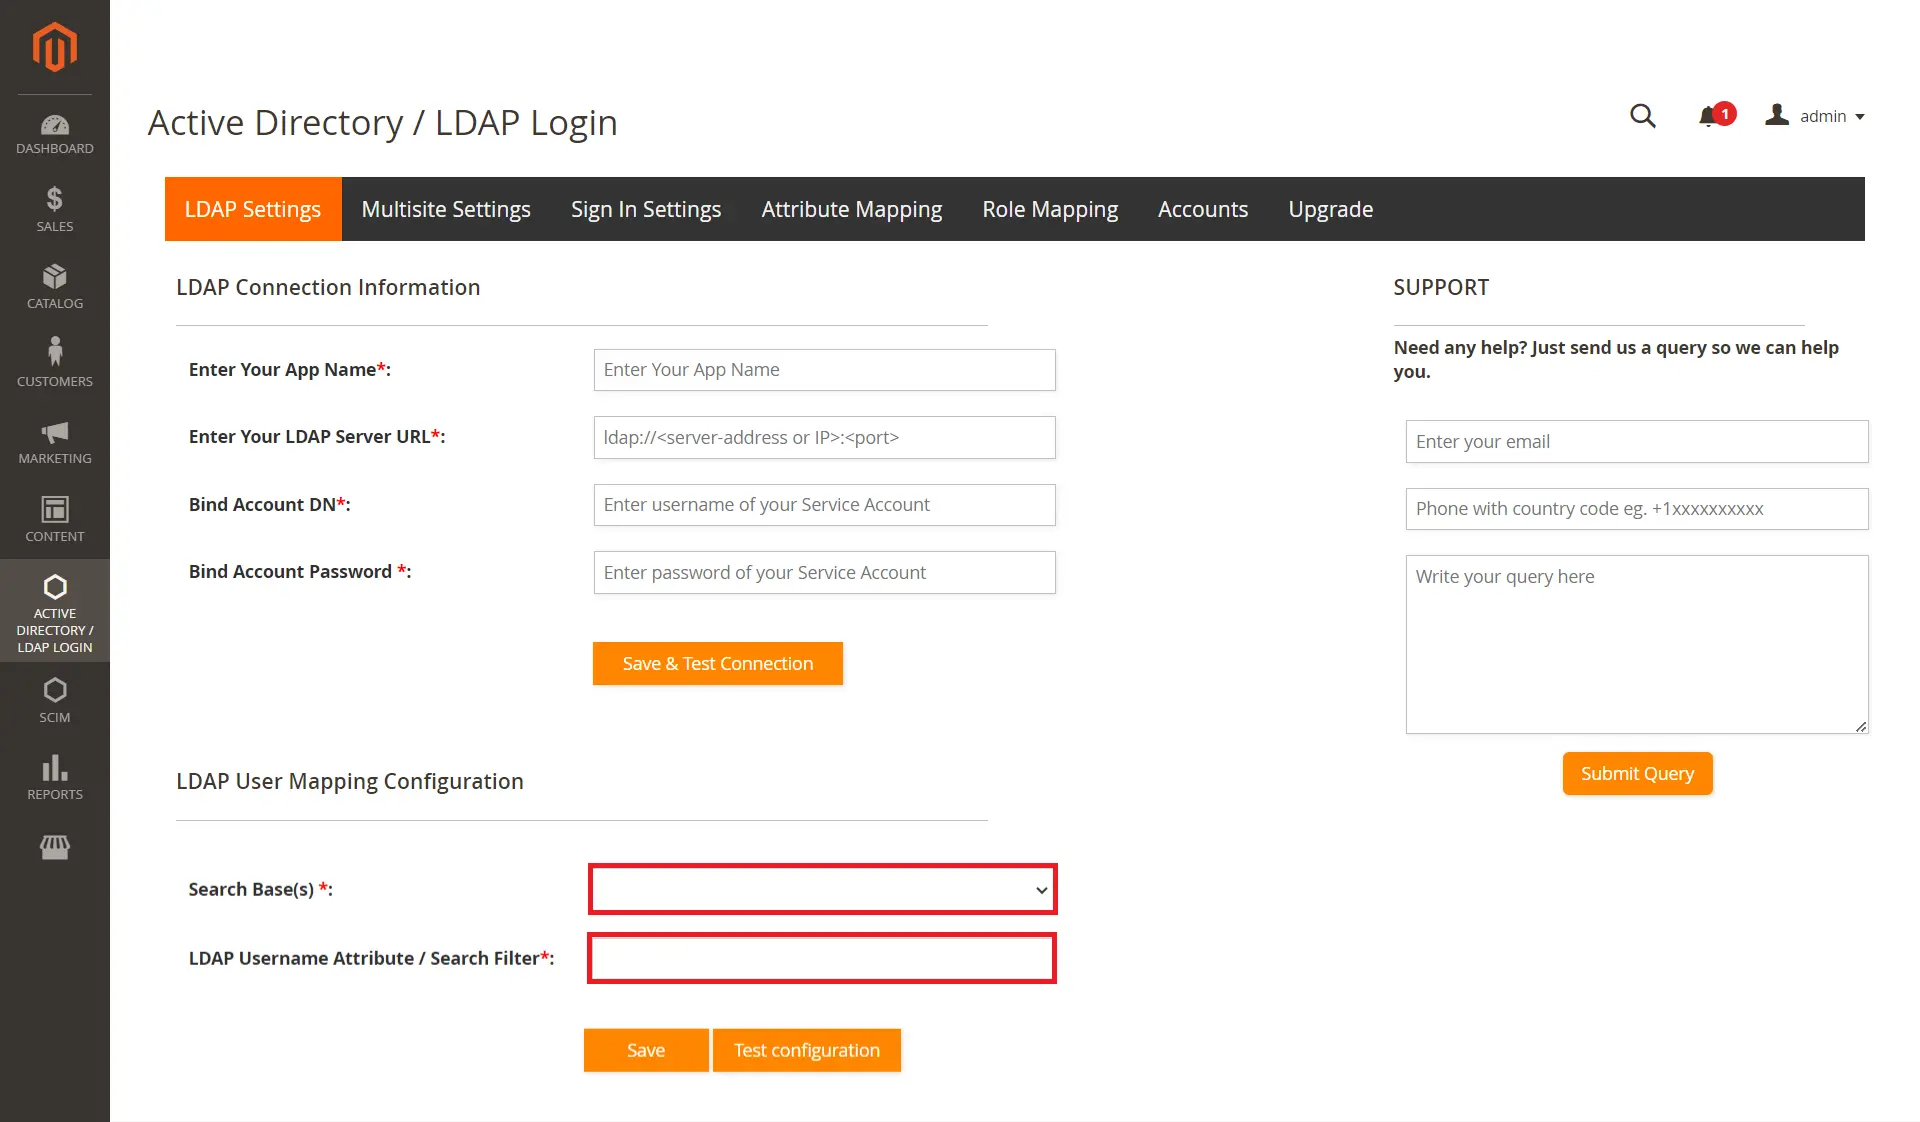 Magento LDAP / AD search base and search filter